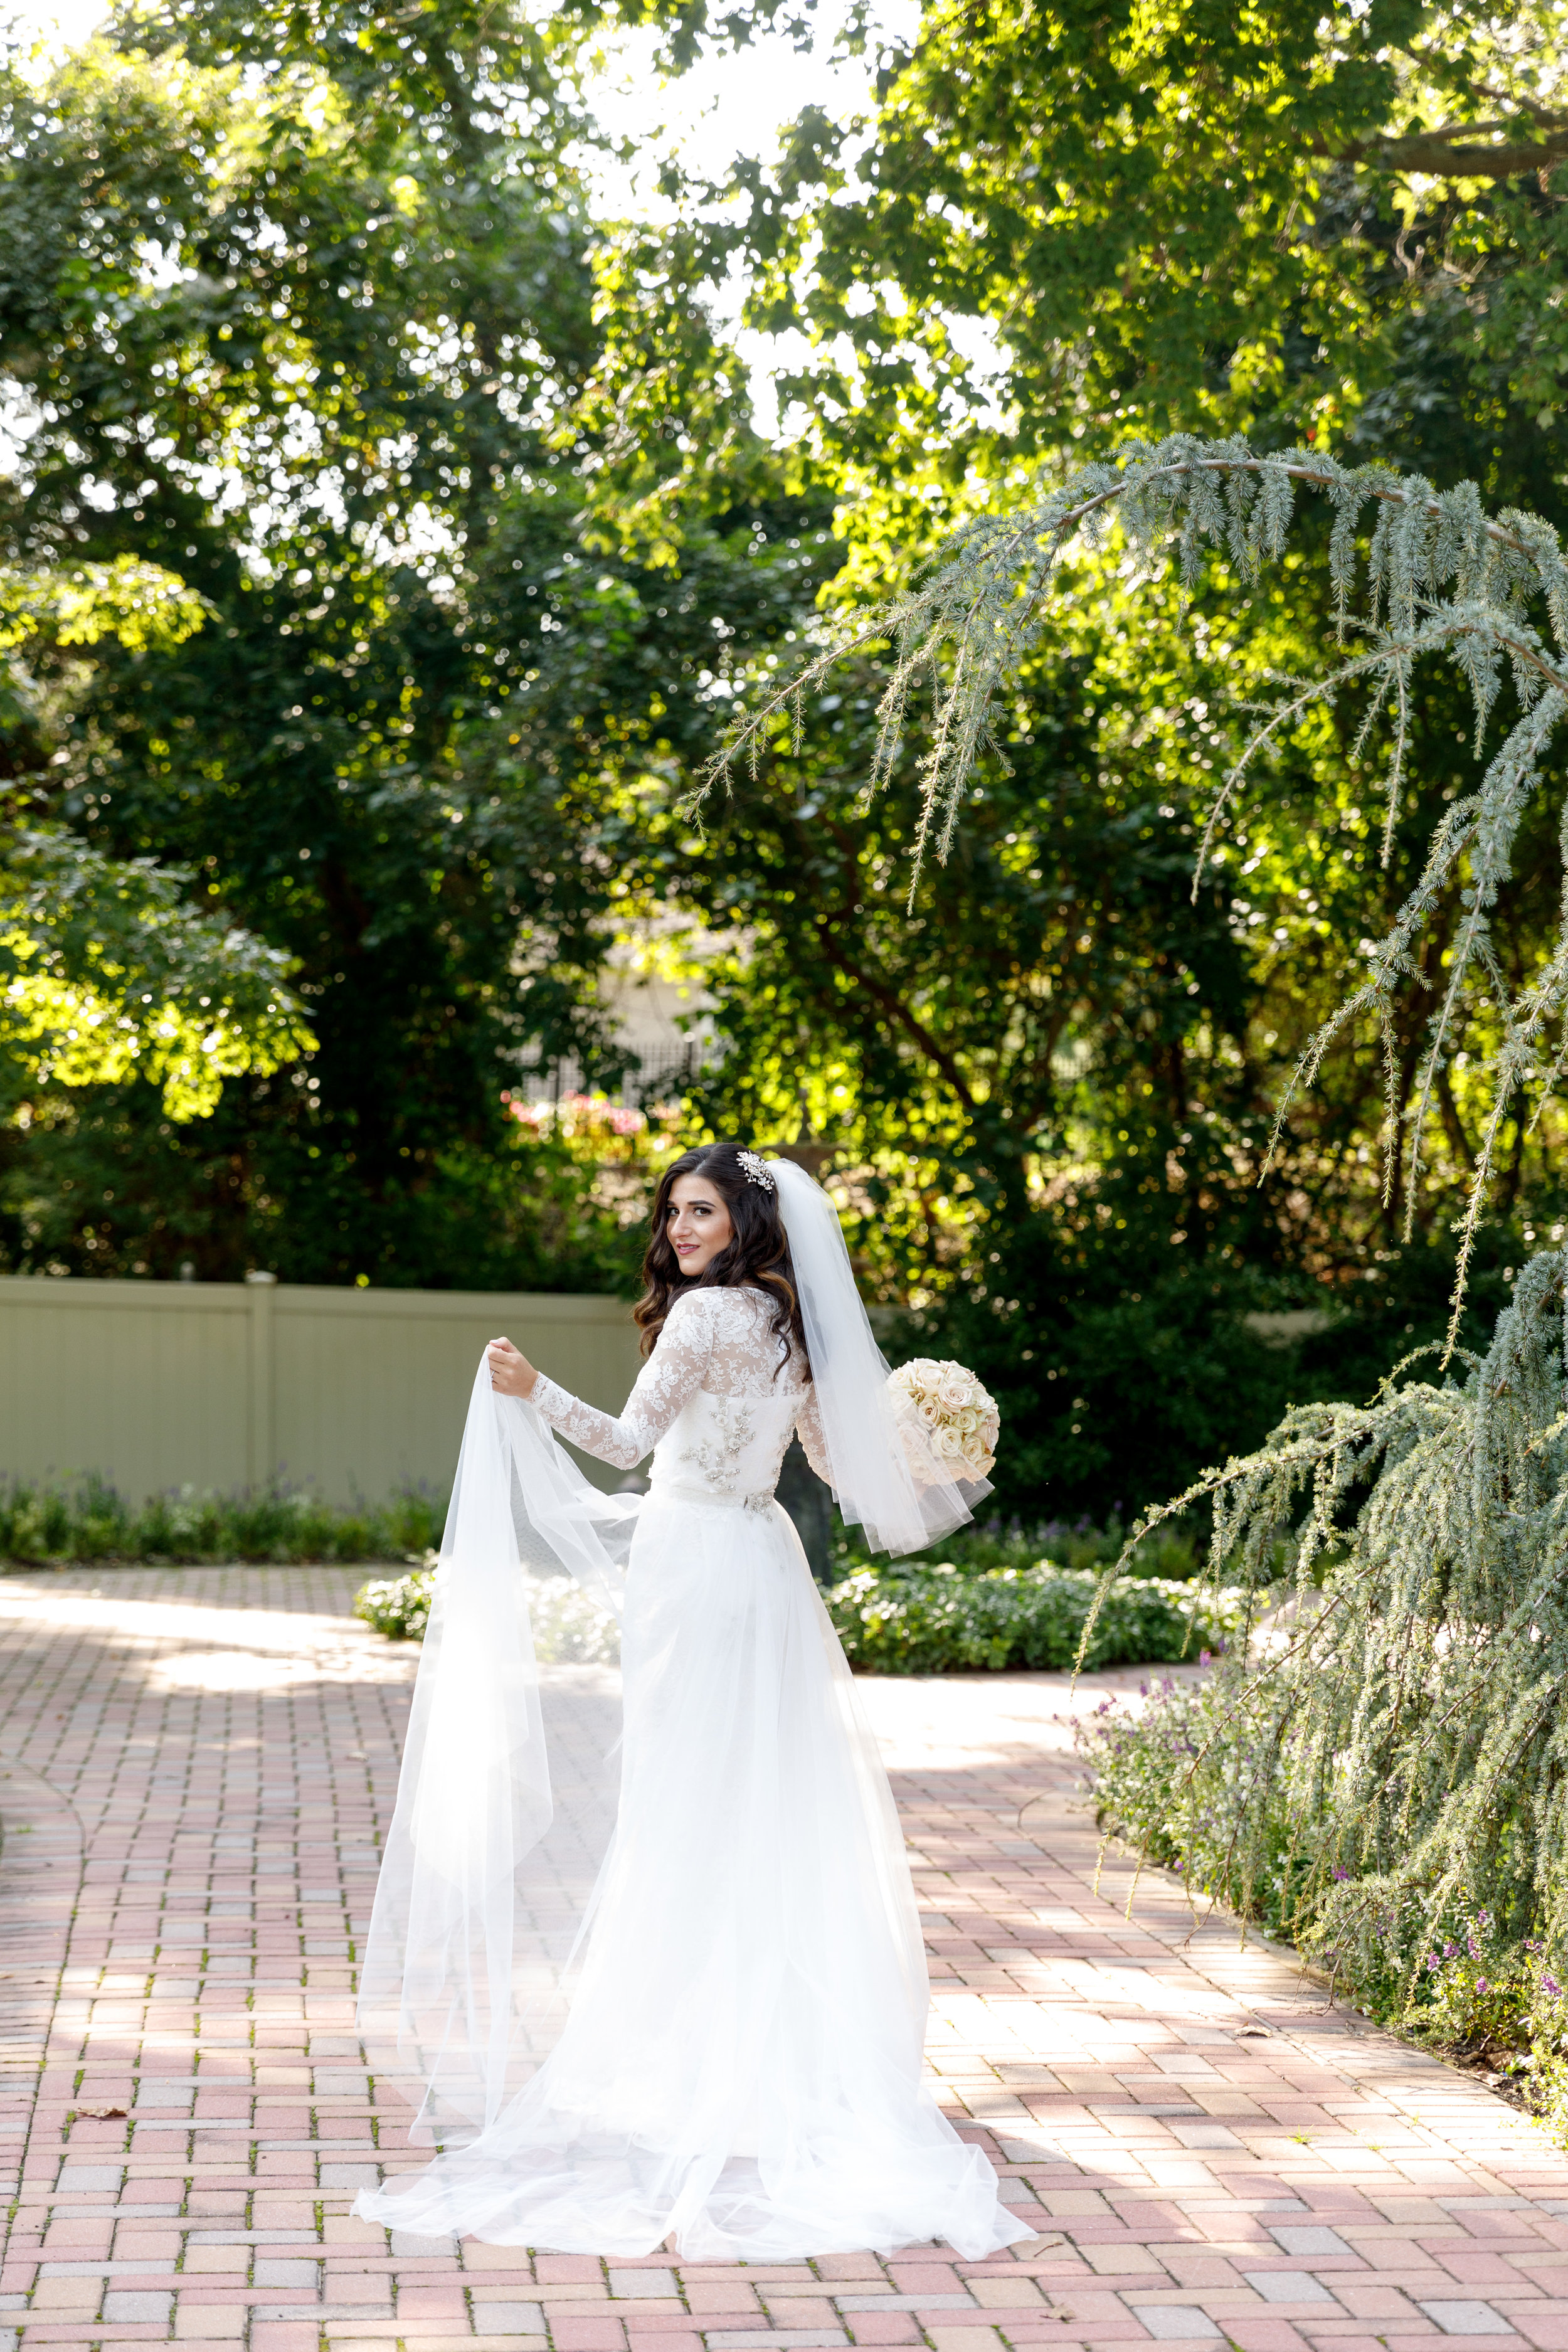 First Look At My Custom Raquel Couture Wedding Dress Esther Santer Fashion Blog NYC Street Style Blogger Outfit OOTD Trendy Fall Ceremony Portrait Photography Bride Groom Beautiful  Outdoor Reception Dancing Inspiration Tulle Train Beading White Lace.JPG